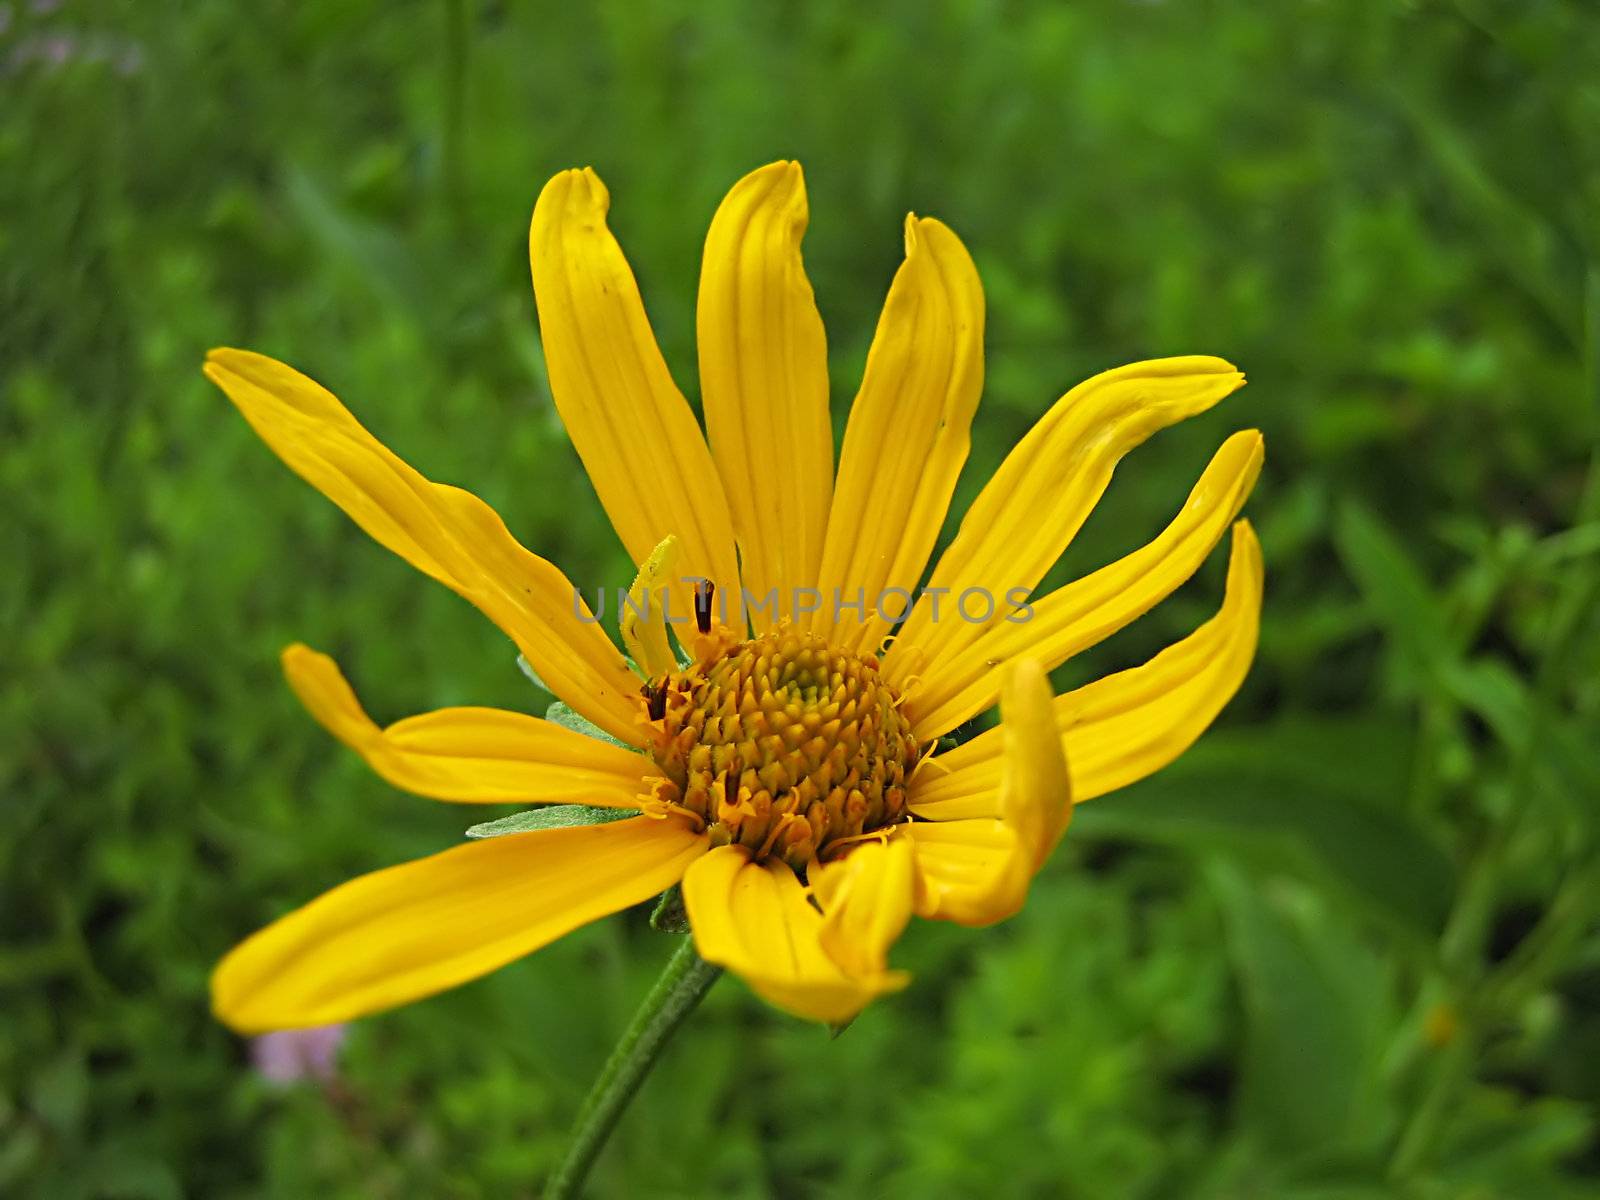 A photograph of a yellow flower in a field.